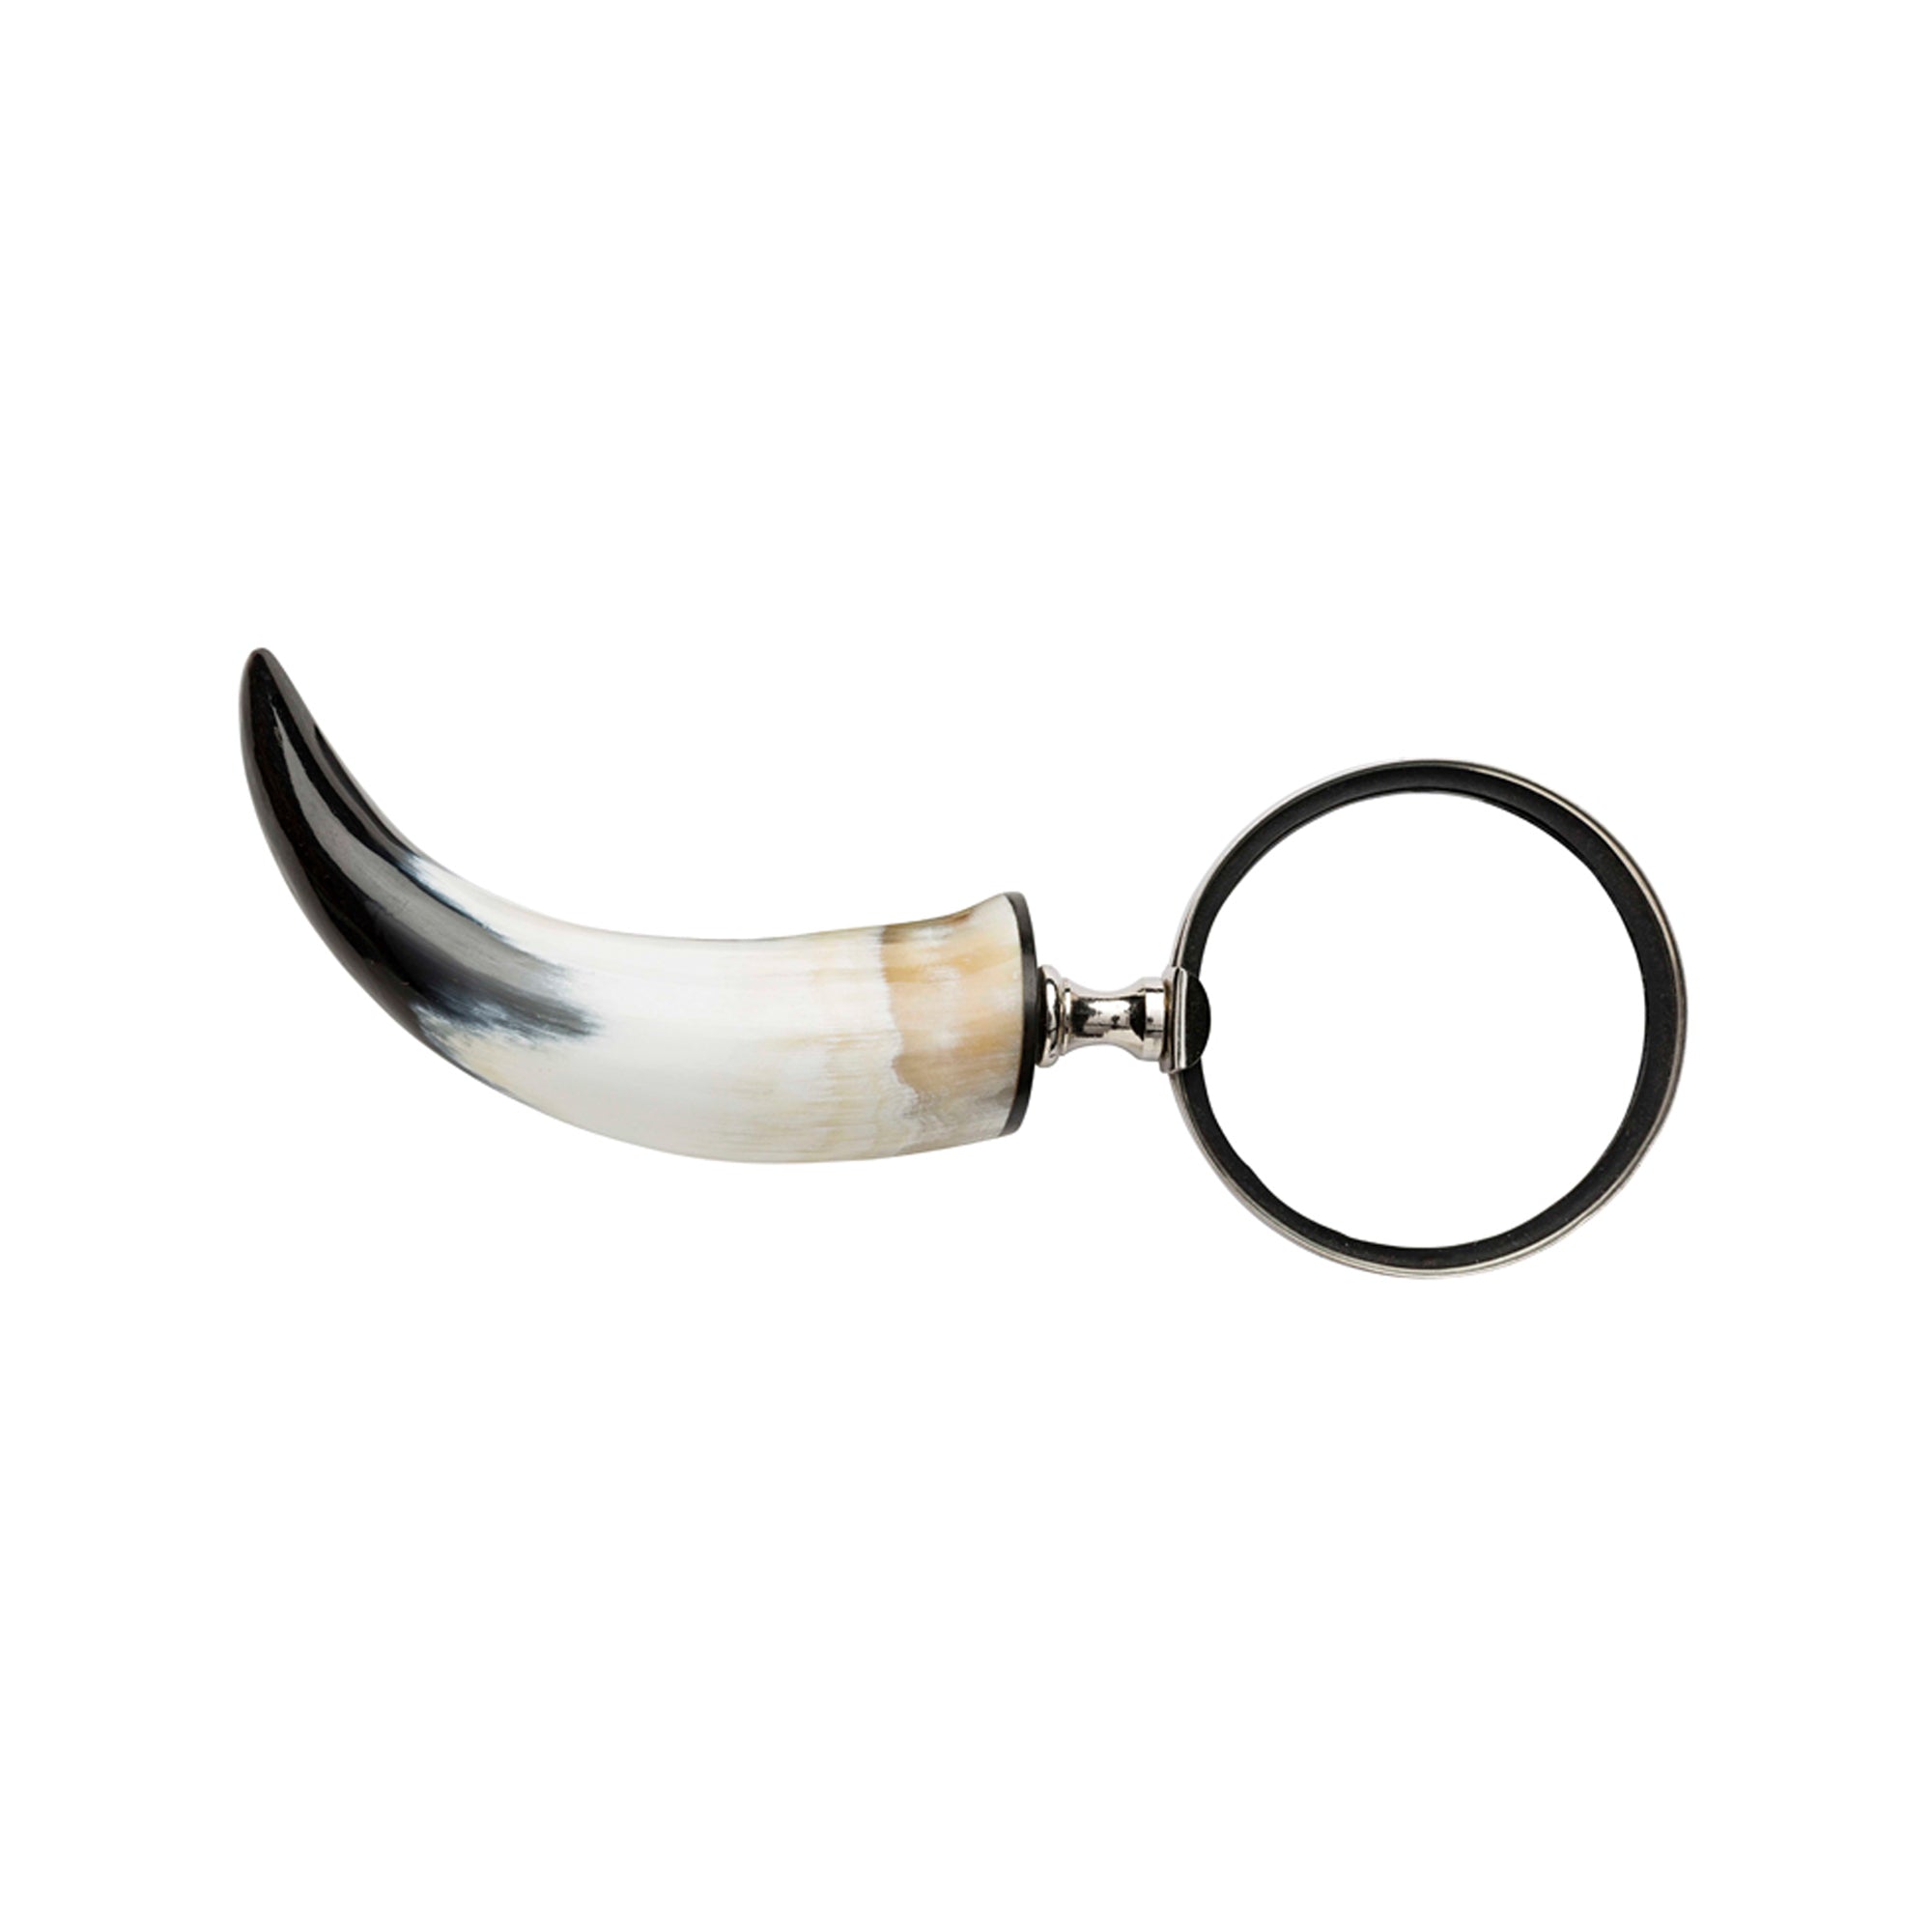 Avada Horn Magnifying Glass